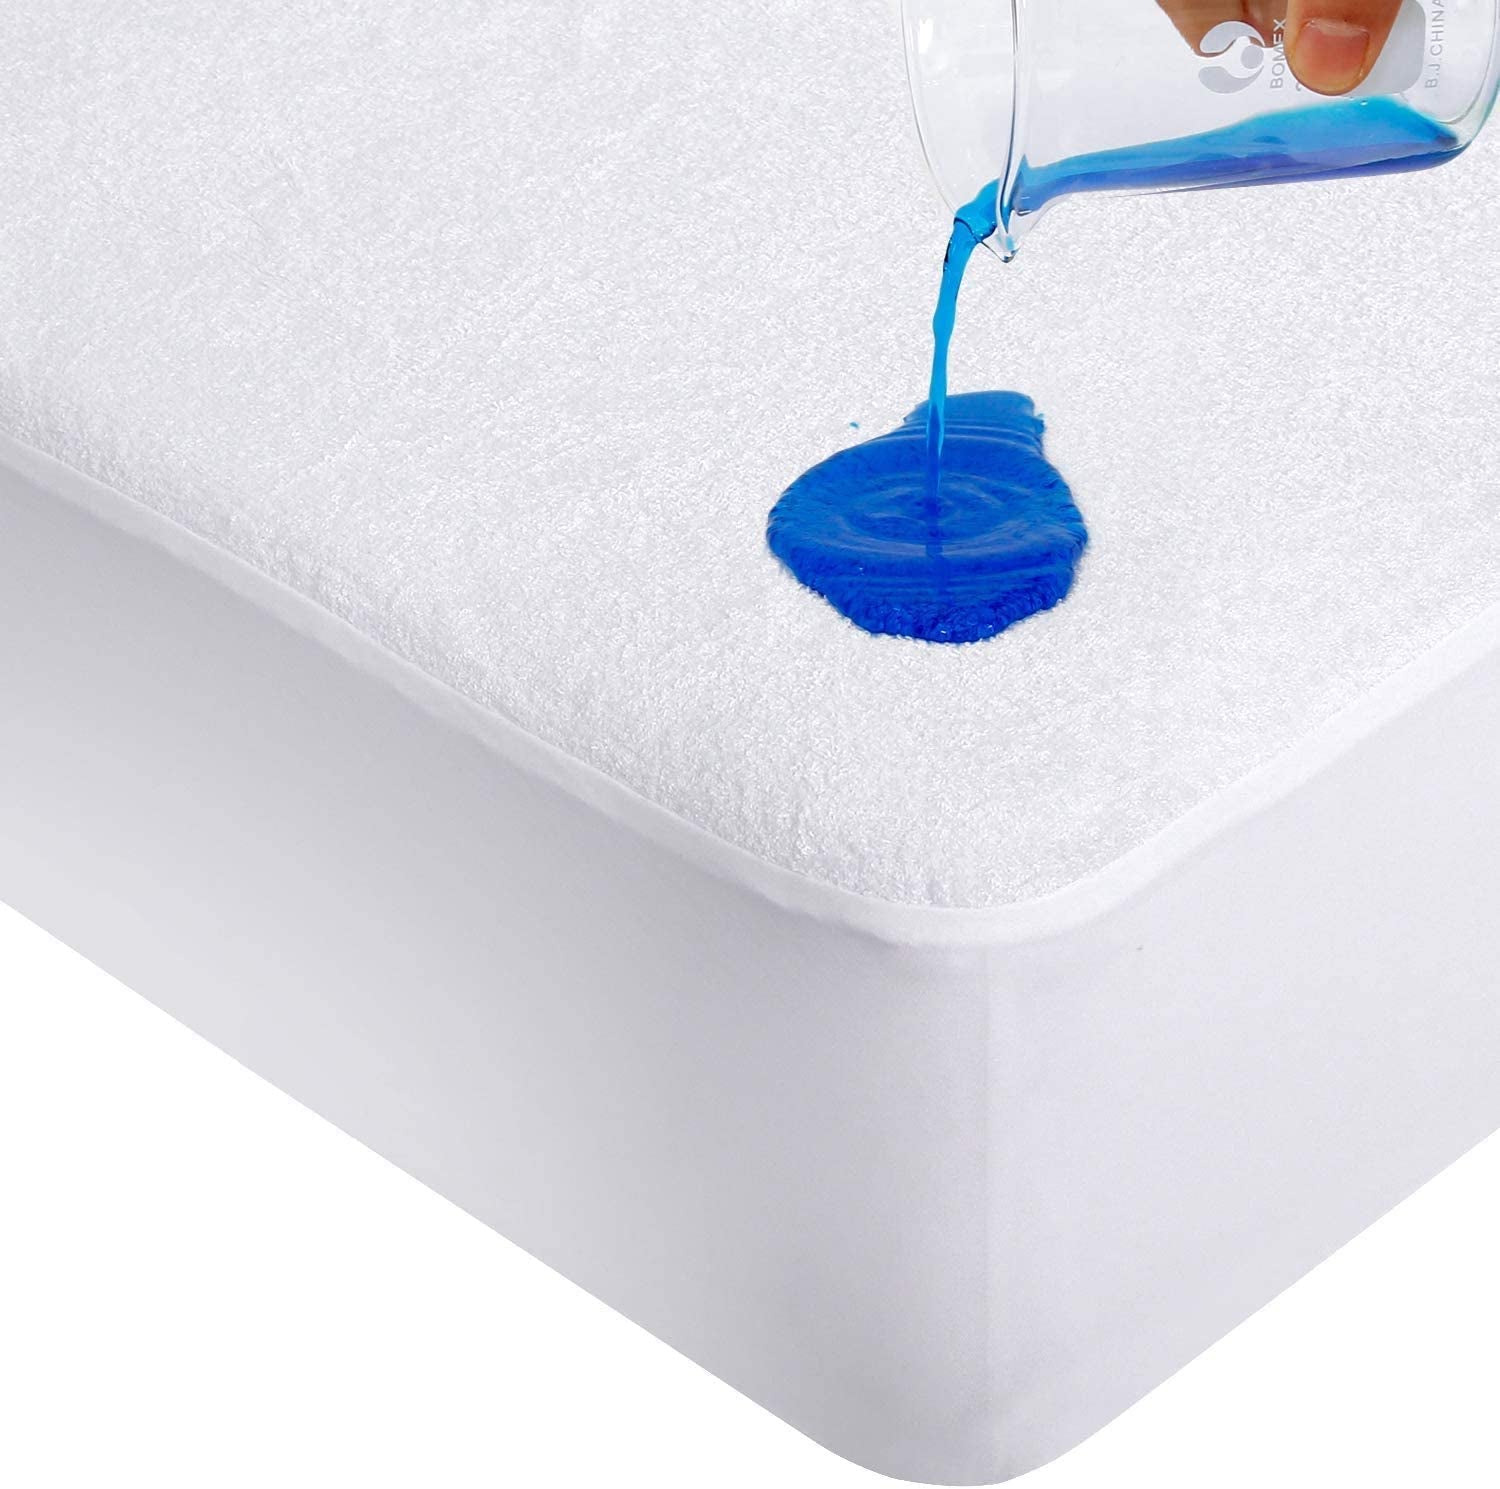 Dudu N Girlie Travel Cot Waterproof Mattress Protector - Toddler Bed Mattress Protector- Cotton Fitted Sheet for Travel Cot Mattress Topper - White, 65x95x10 cm.